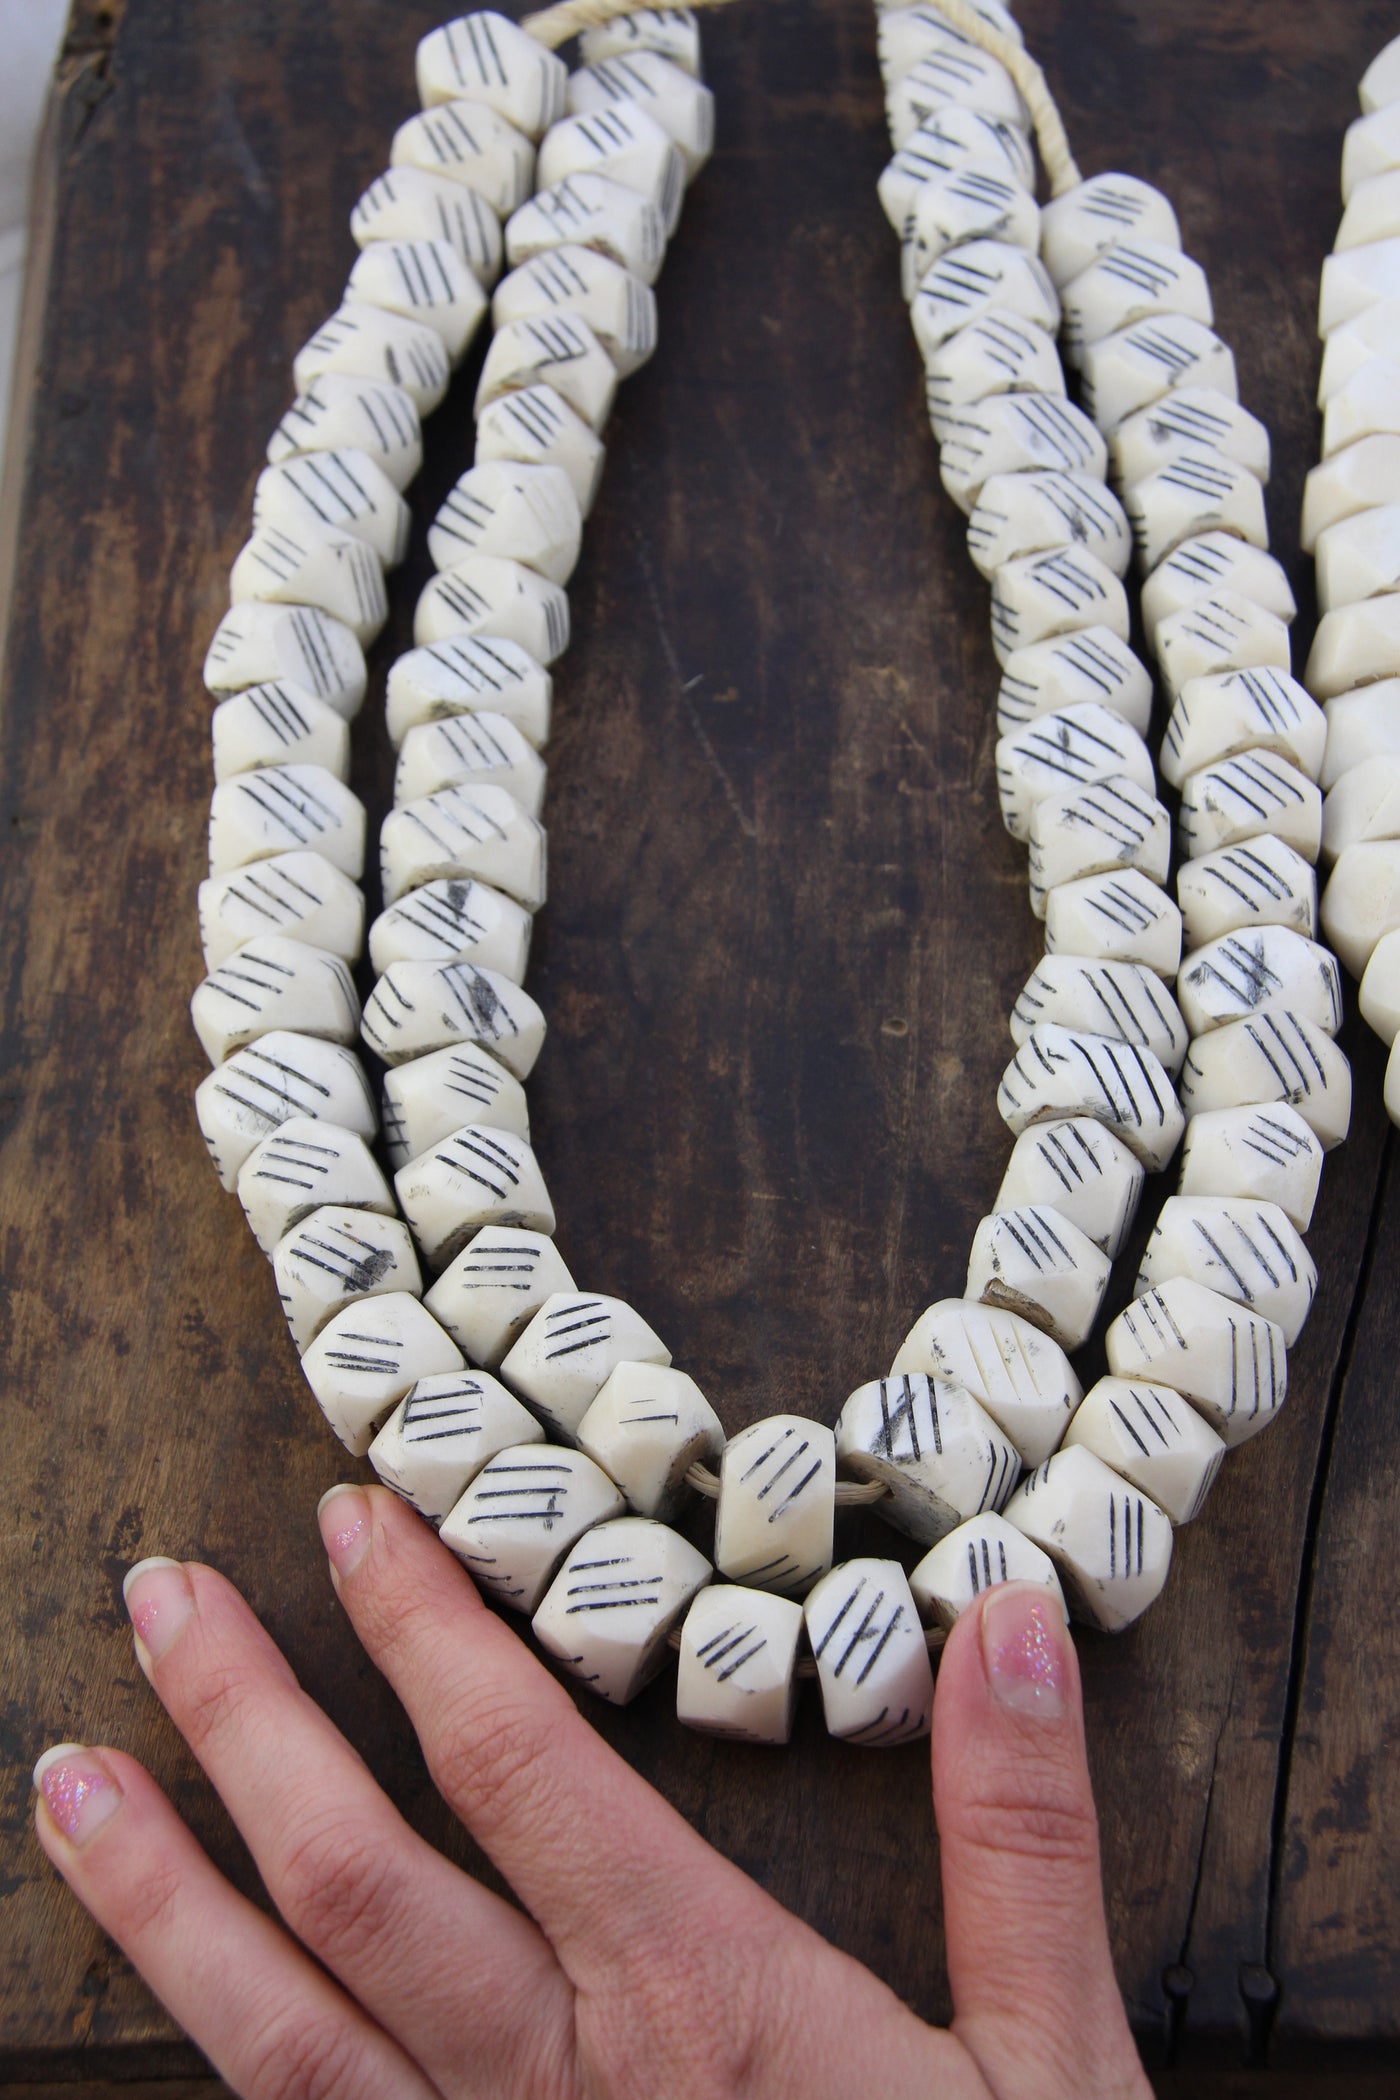 Large Faceted White Kenyan Recycled Bone Beads, Necklace, 22mm